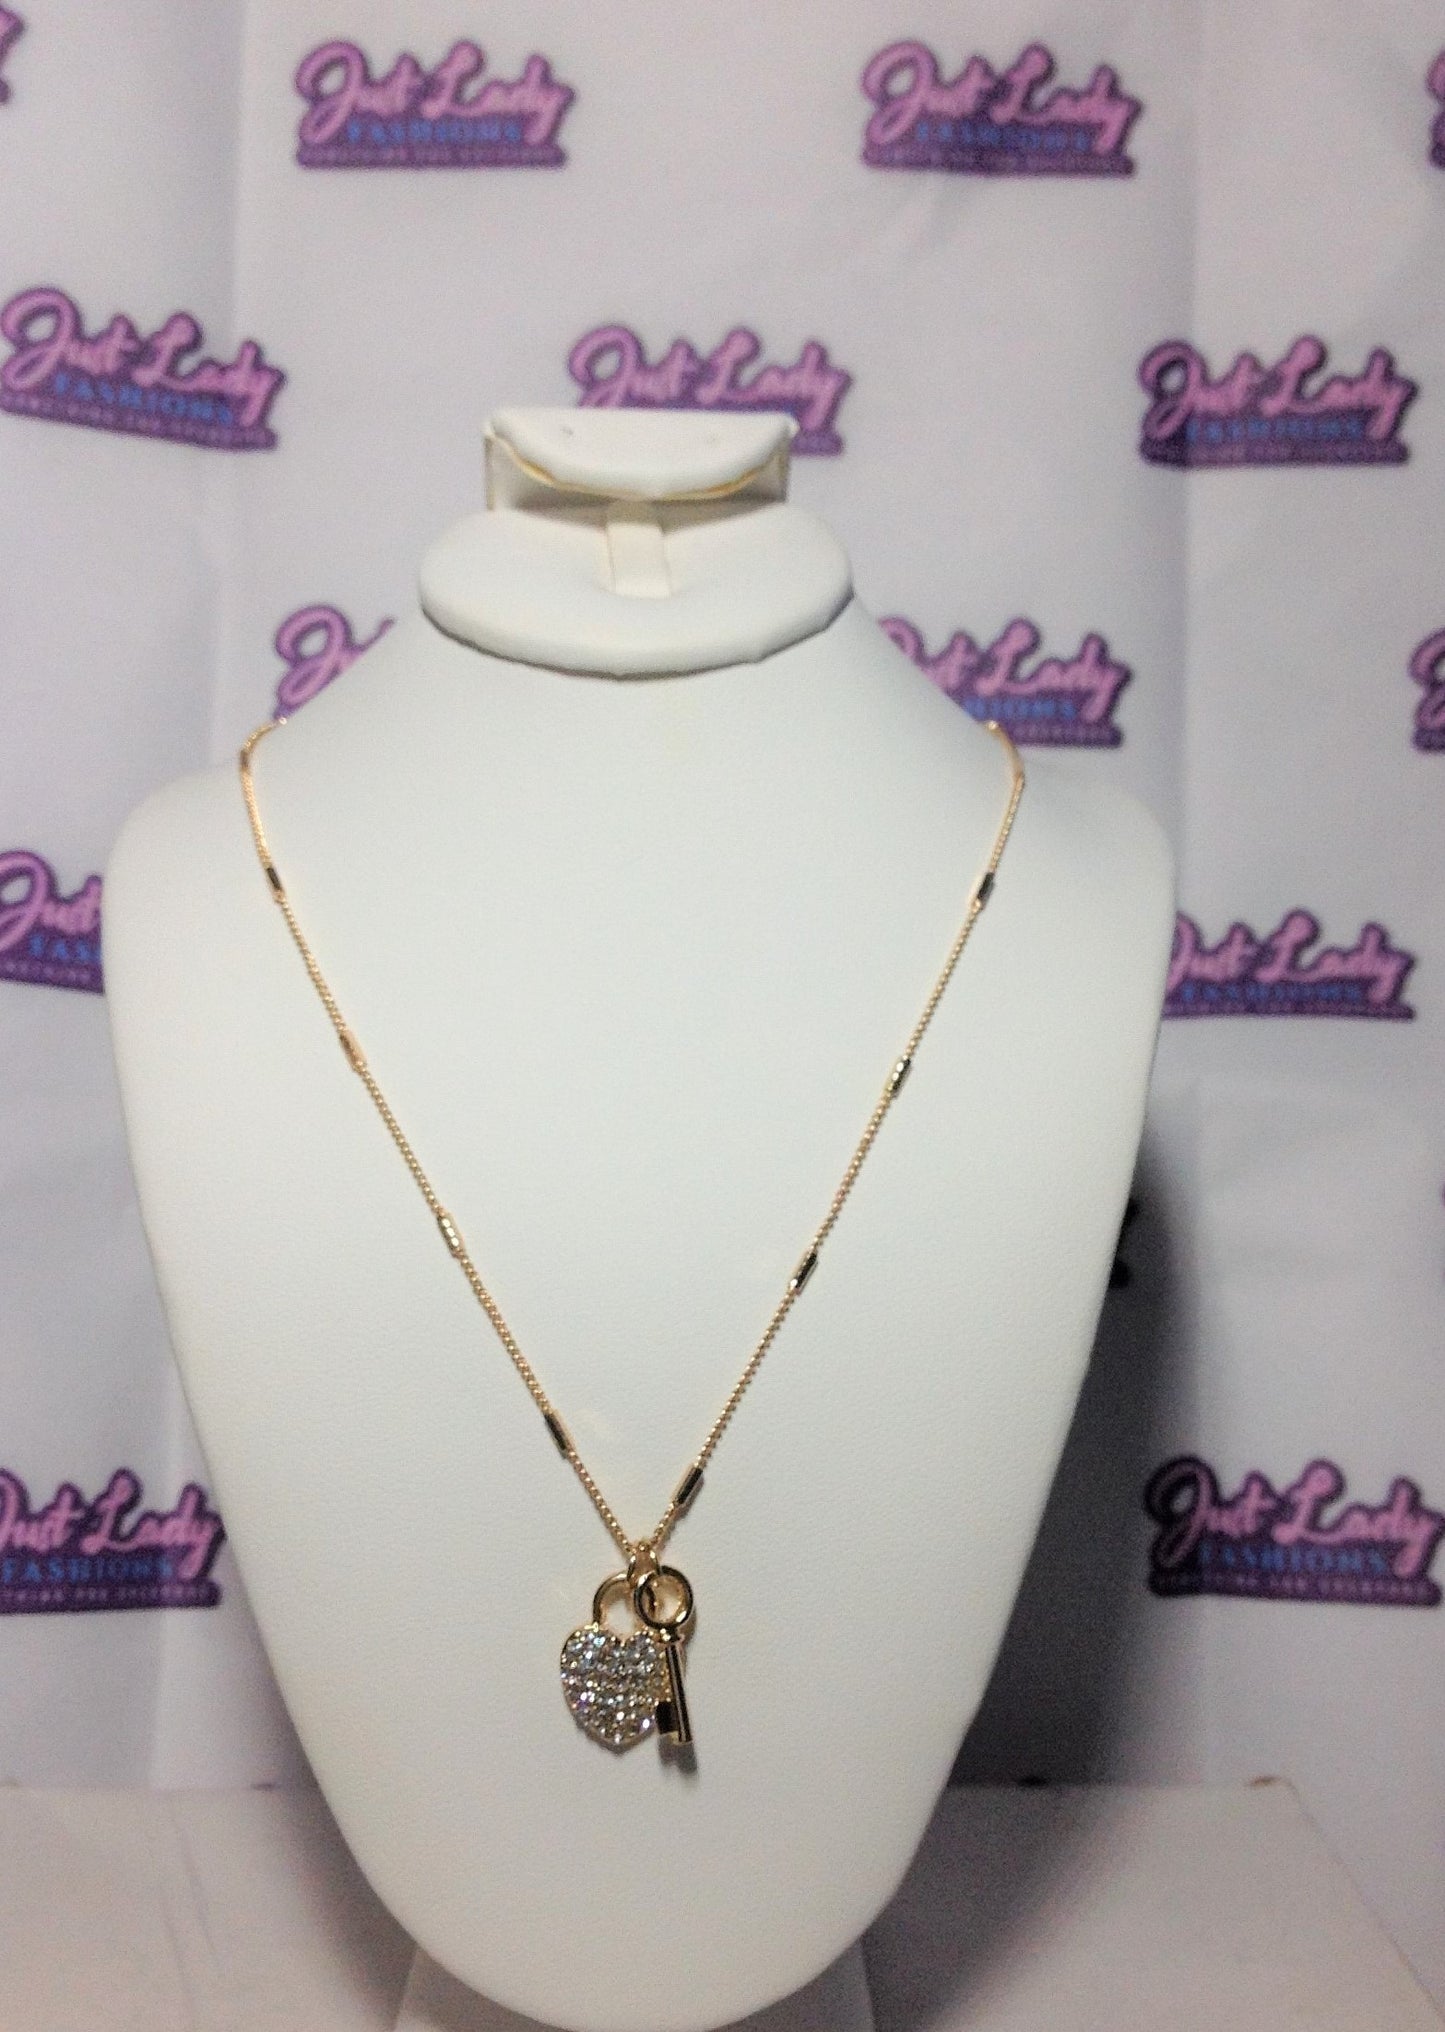 Radiance Lock and Key Costume Jewelry Necklace